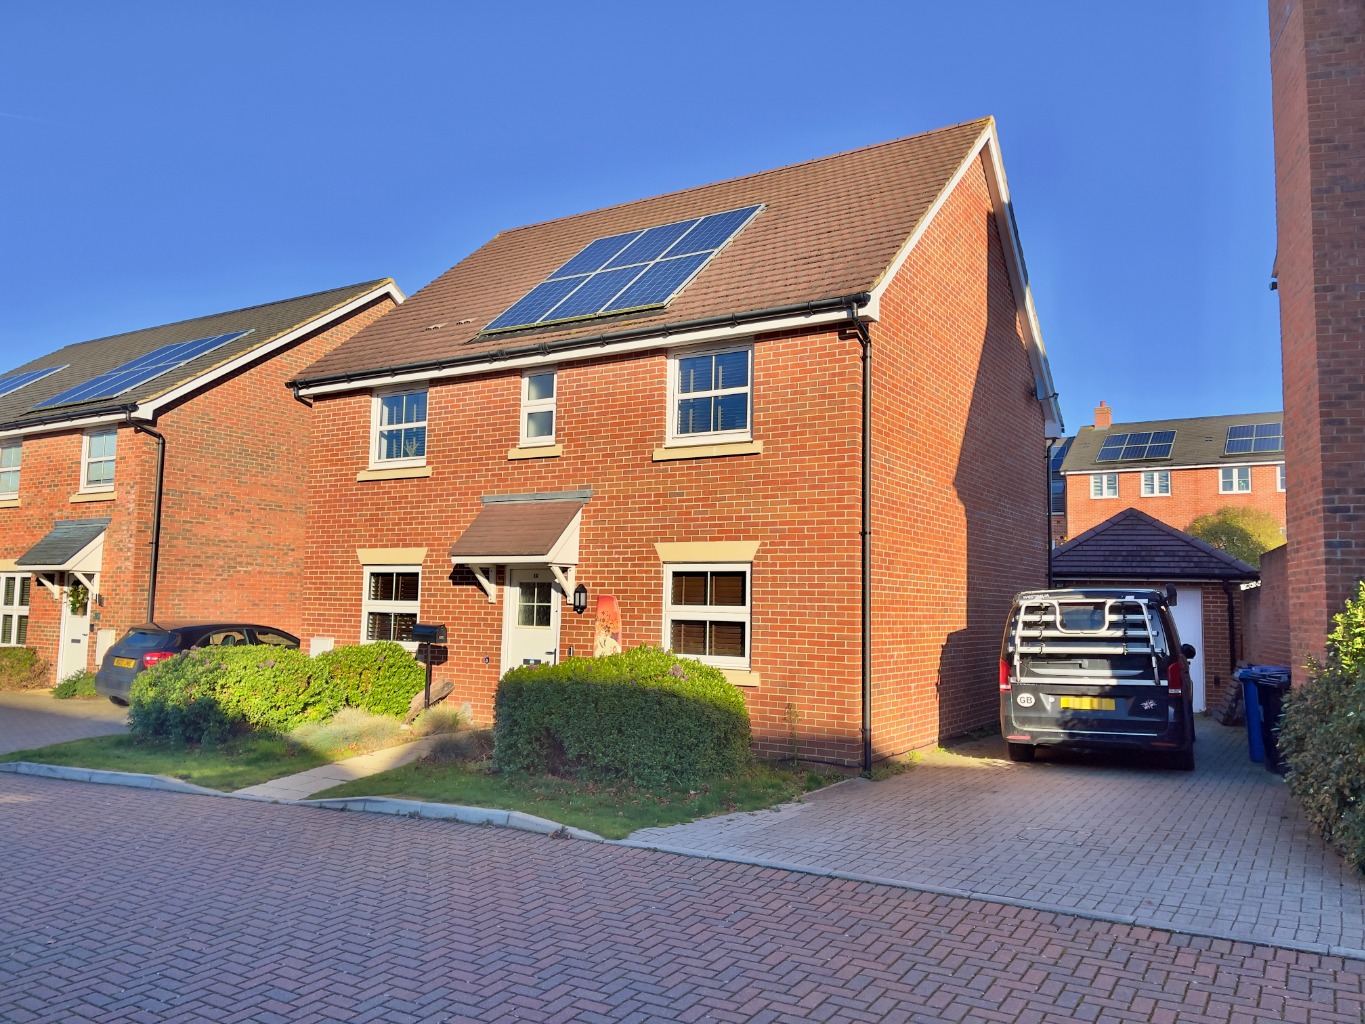 Available with no onward chain is this stunning four bedroom detached family home with detached garage and driveway, set within a cul de sac of the sought after development of Crookham Park in Church Crookham...